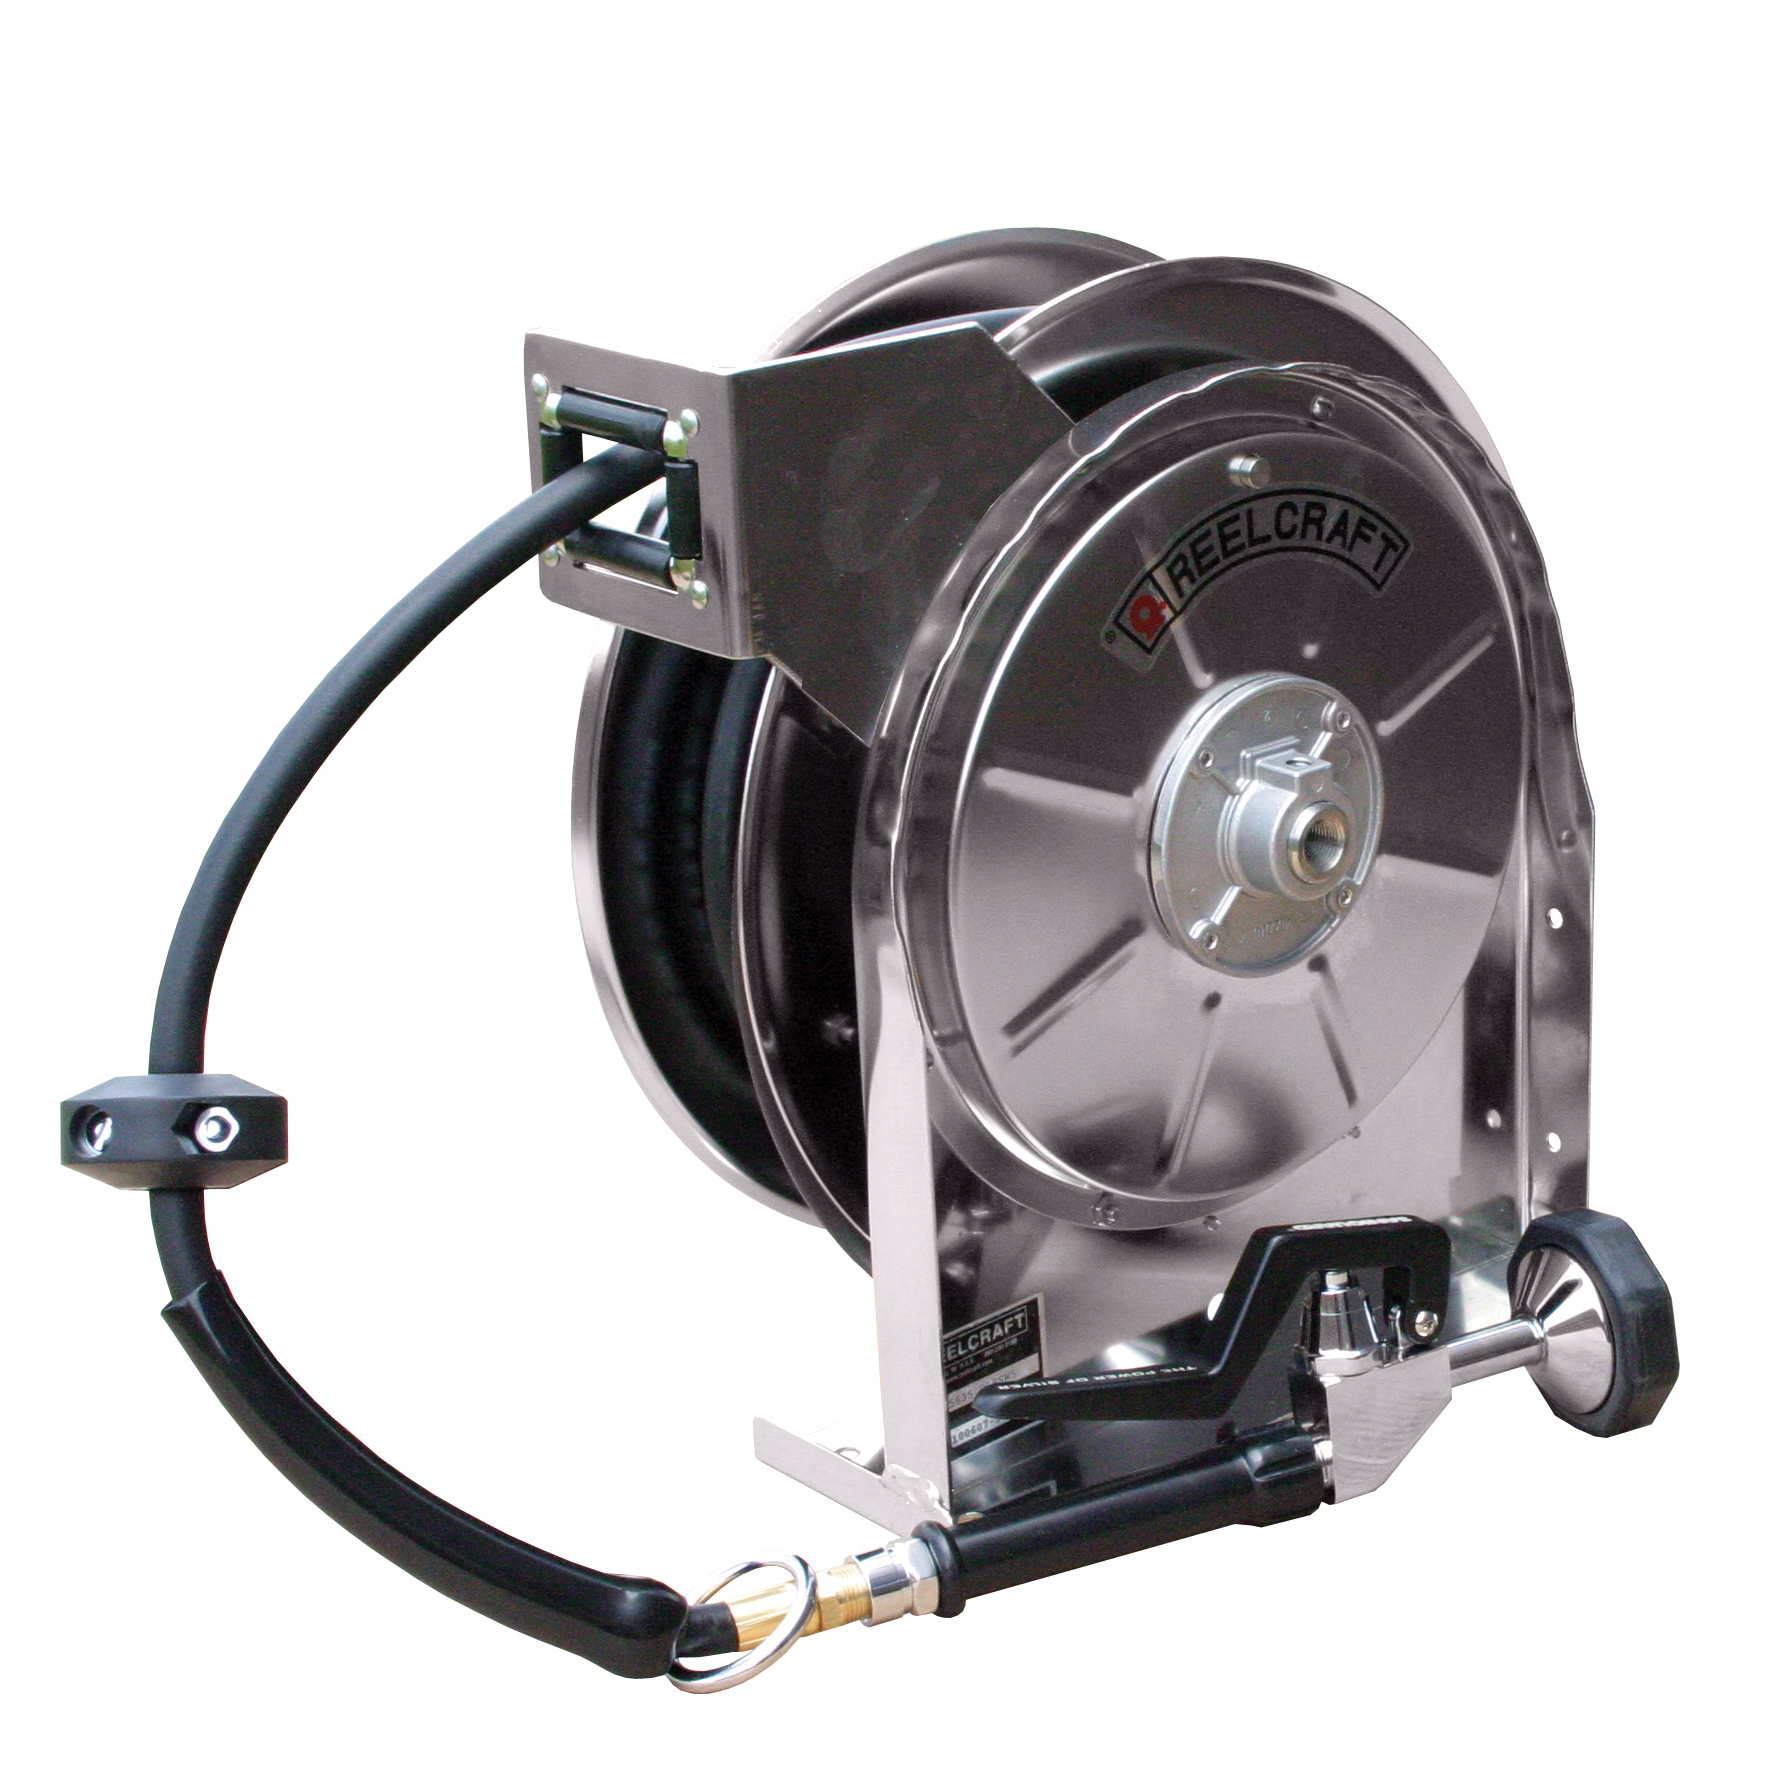 REELCRAFT 5635 OLSSW5 Stainless Steel Hose Reel 3/8"x35' 125 psi w/Hose & Nozzle 